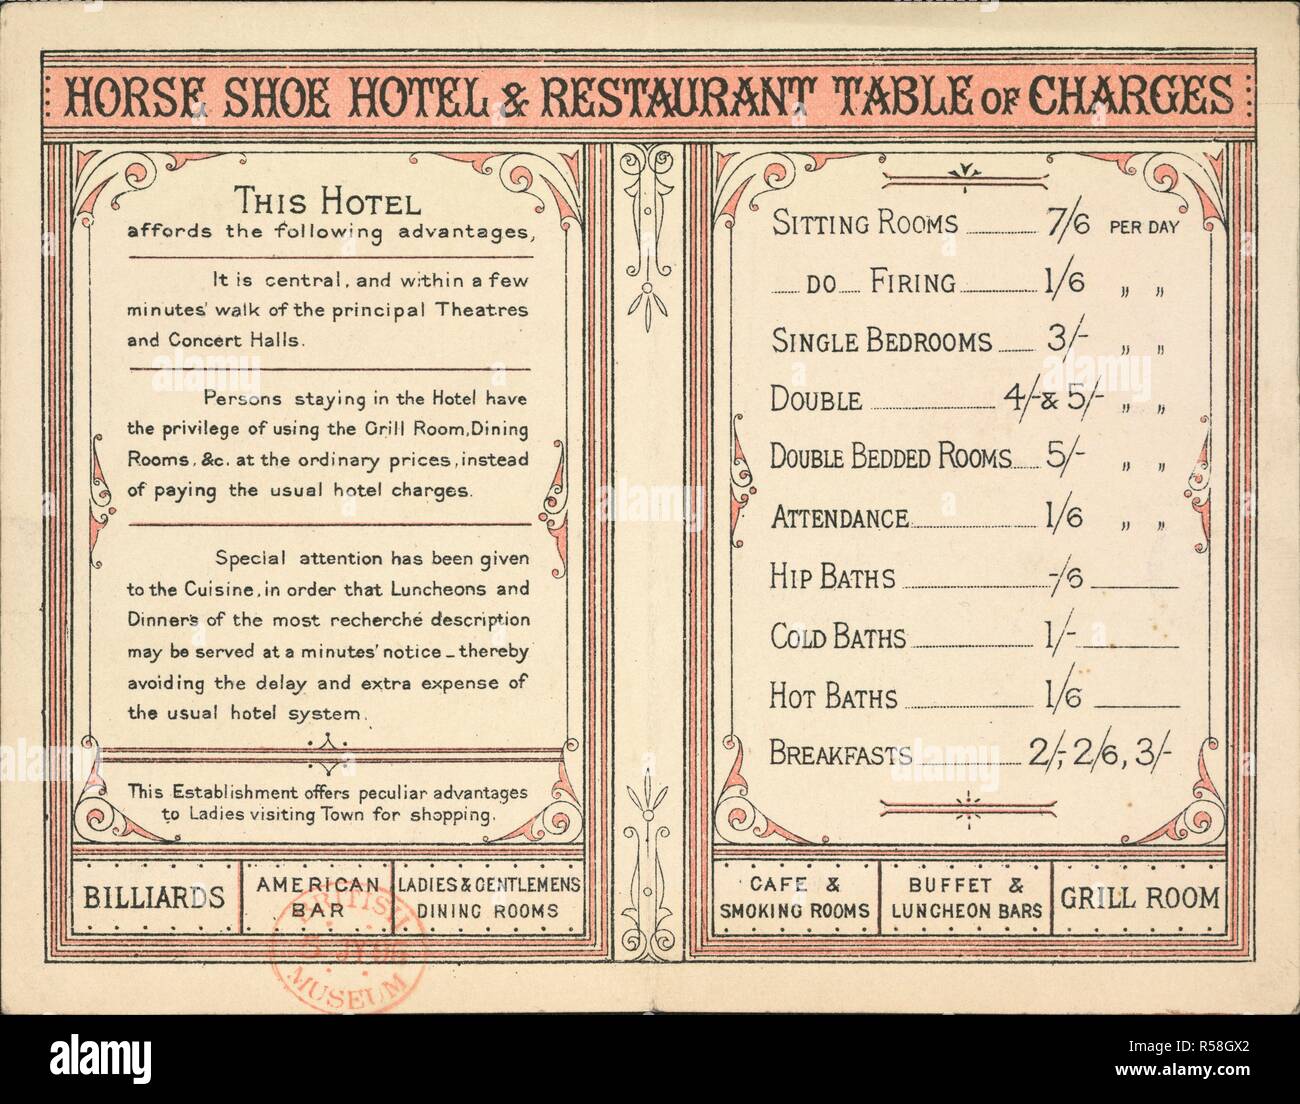 Horse Shoe Hotel and Restaurant. Tottenham Court Road, London, W.C. Contains the Horse Shoe Hotel & Restaurant table of charges, on the inner leaves, and a specimen menu and name of the proprietor, Charles Best, on the final leaf. Advertisement. A collection of pamphlets, handbills, and miscellaneous printed matter relating to Victorian entertainment and everyday life. [London], [1886]. Source: EVAN.5425,. Language: English. Author: Evanion, Henry. Stock Photo